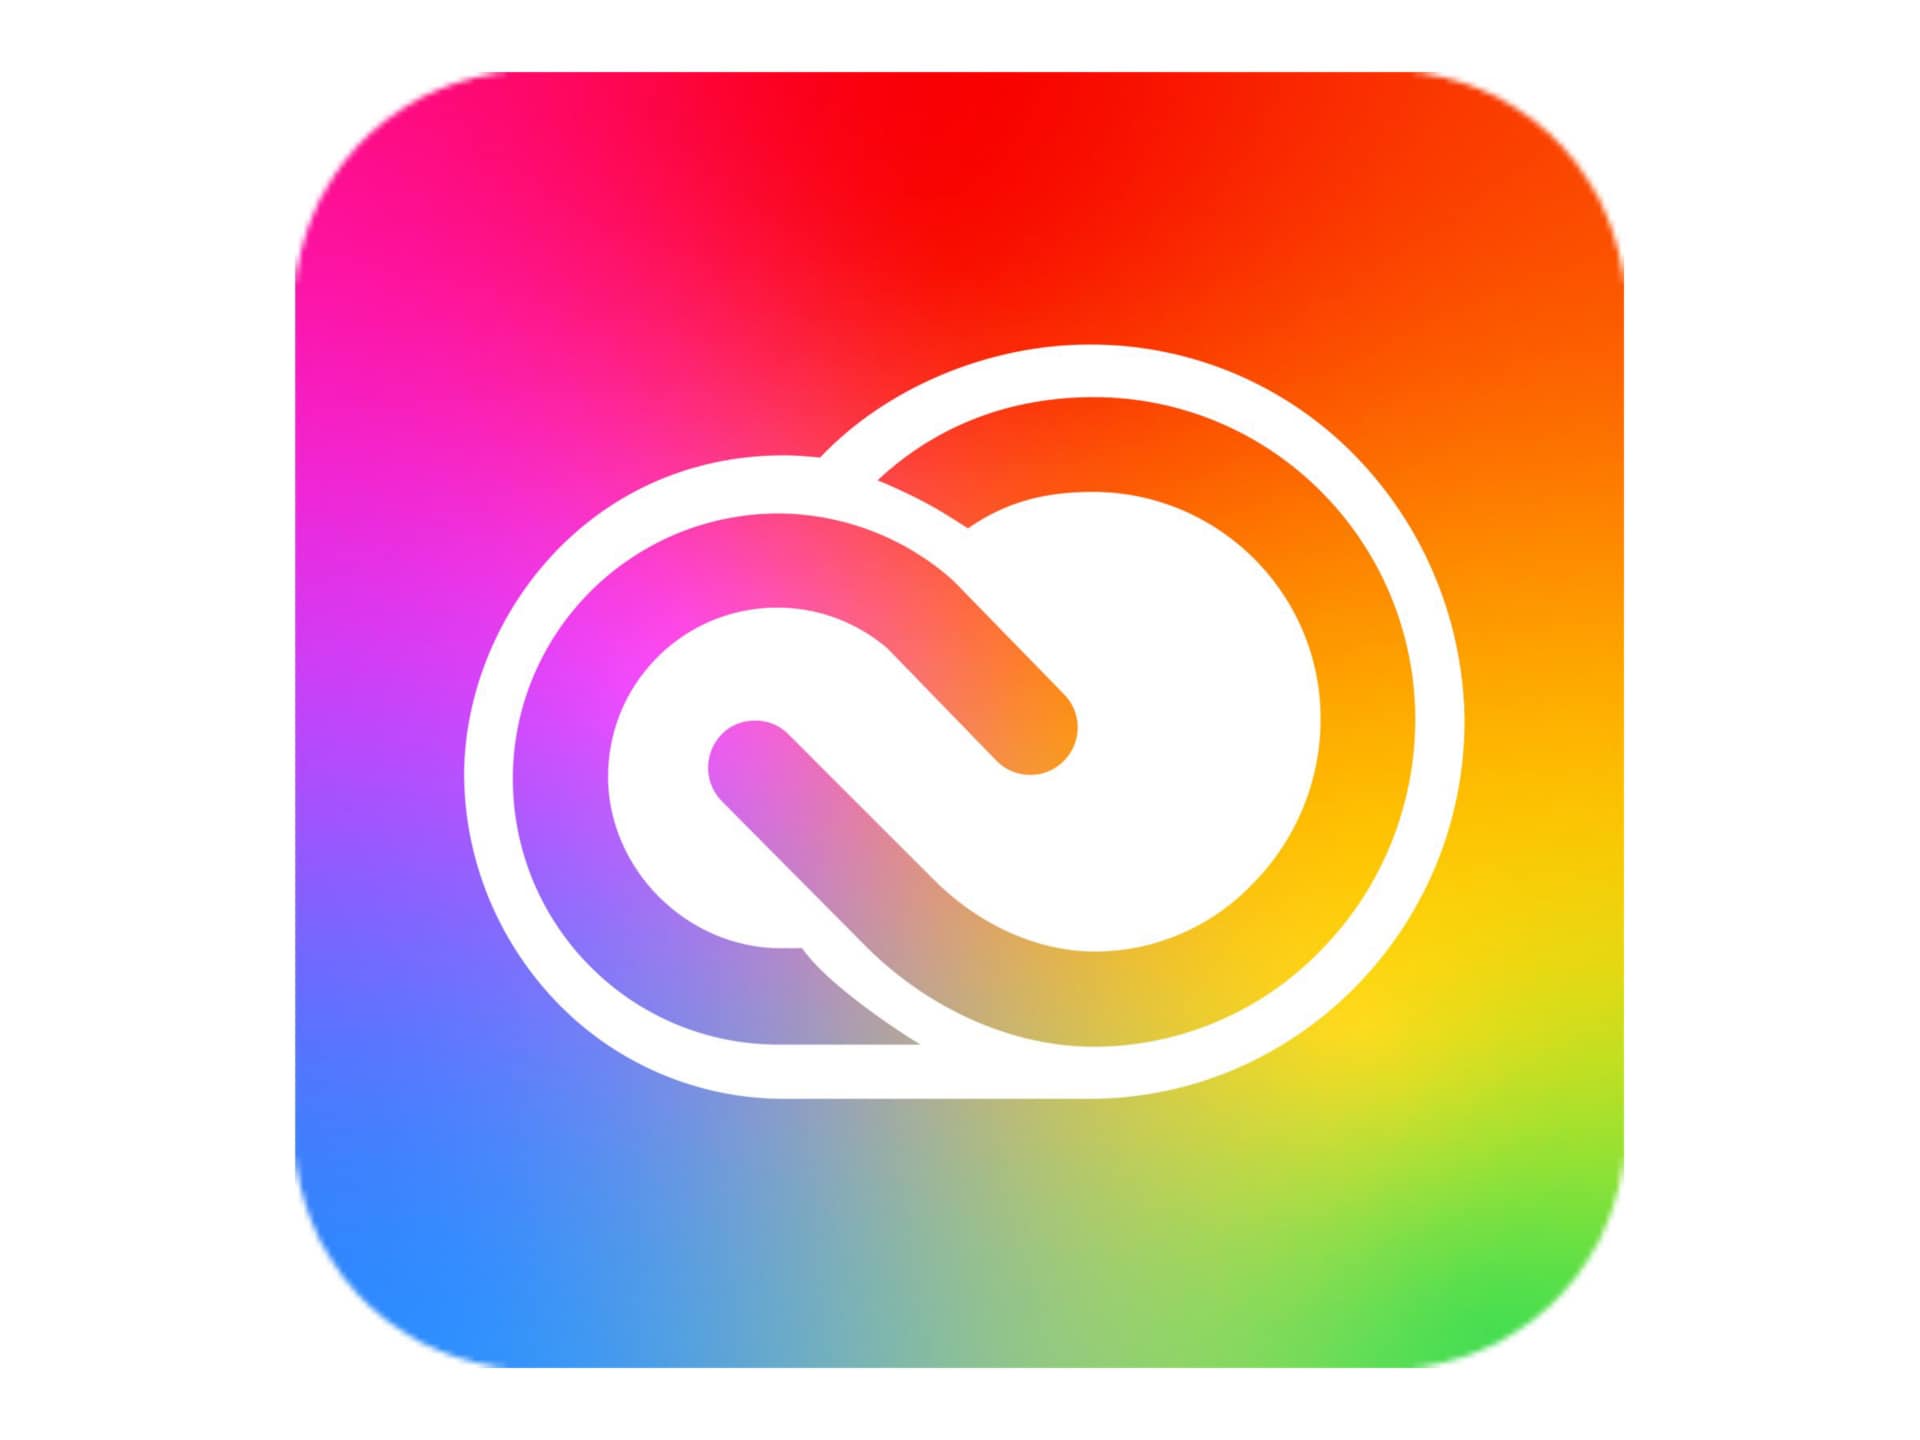 Adobe Creative Cloud for Enterprise - All Apps - Subscription New (11 months) - 1 device